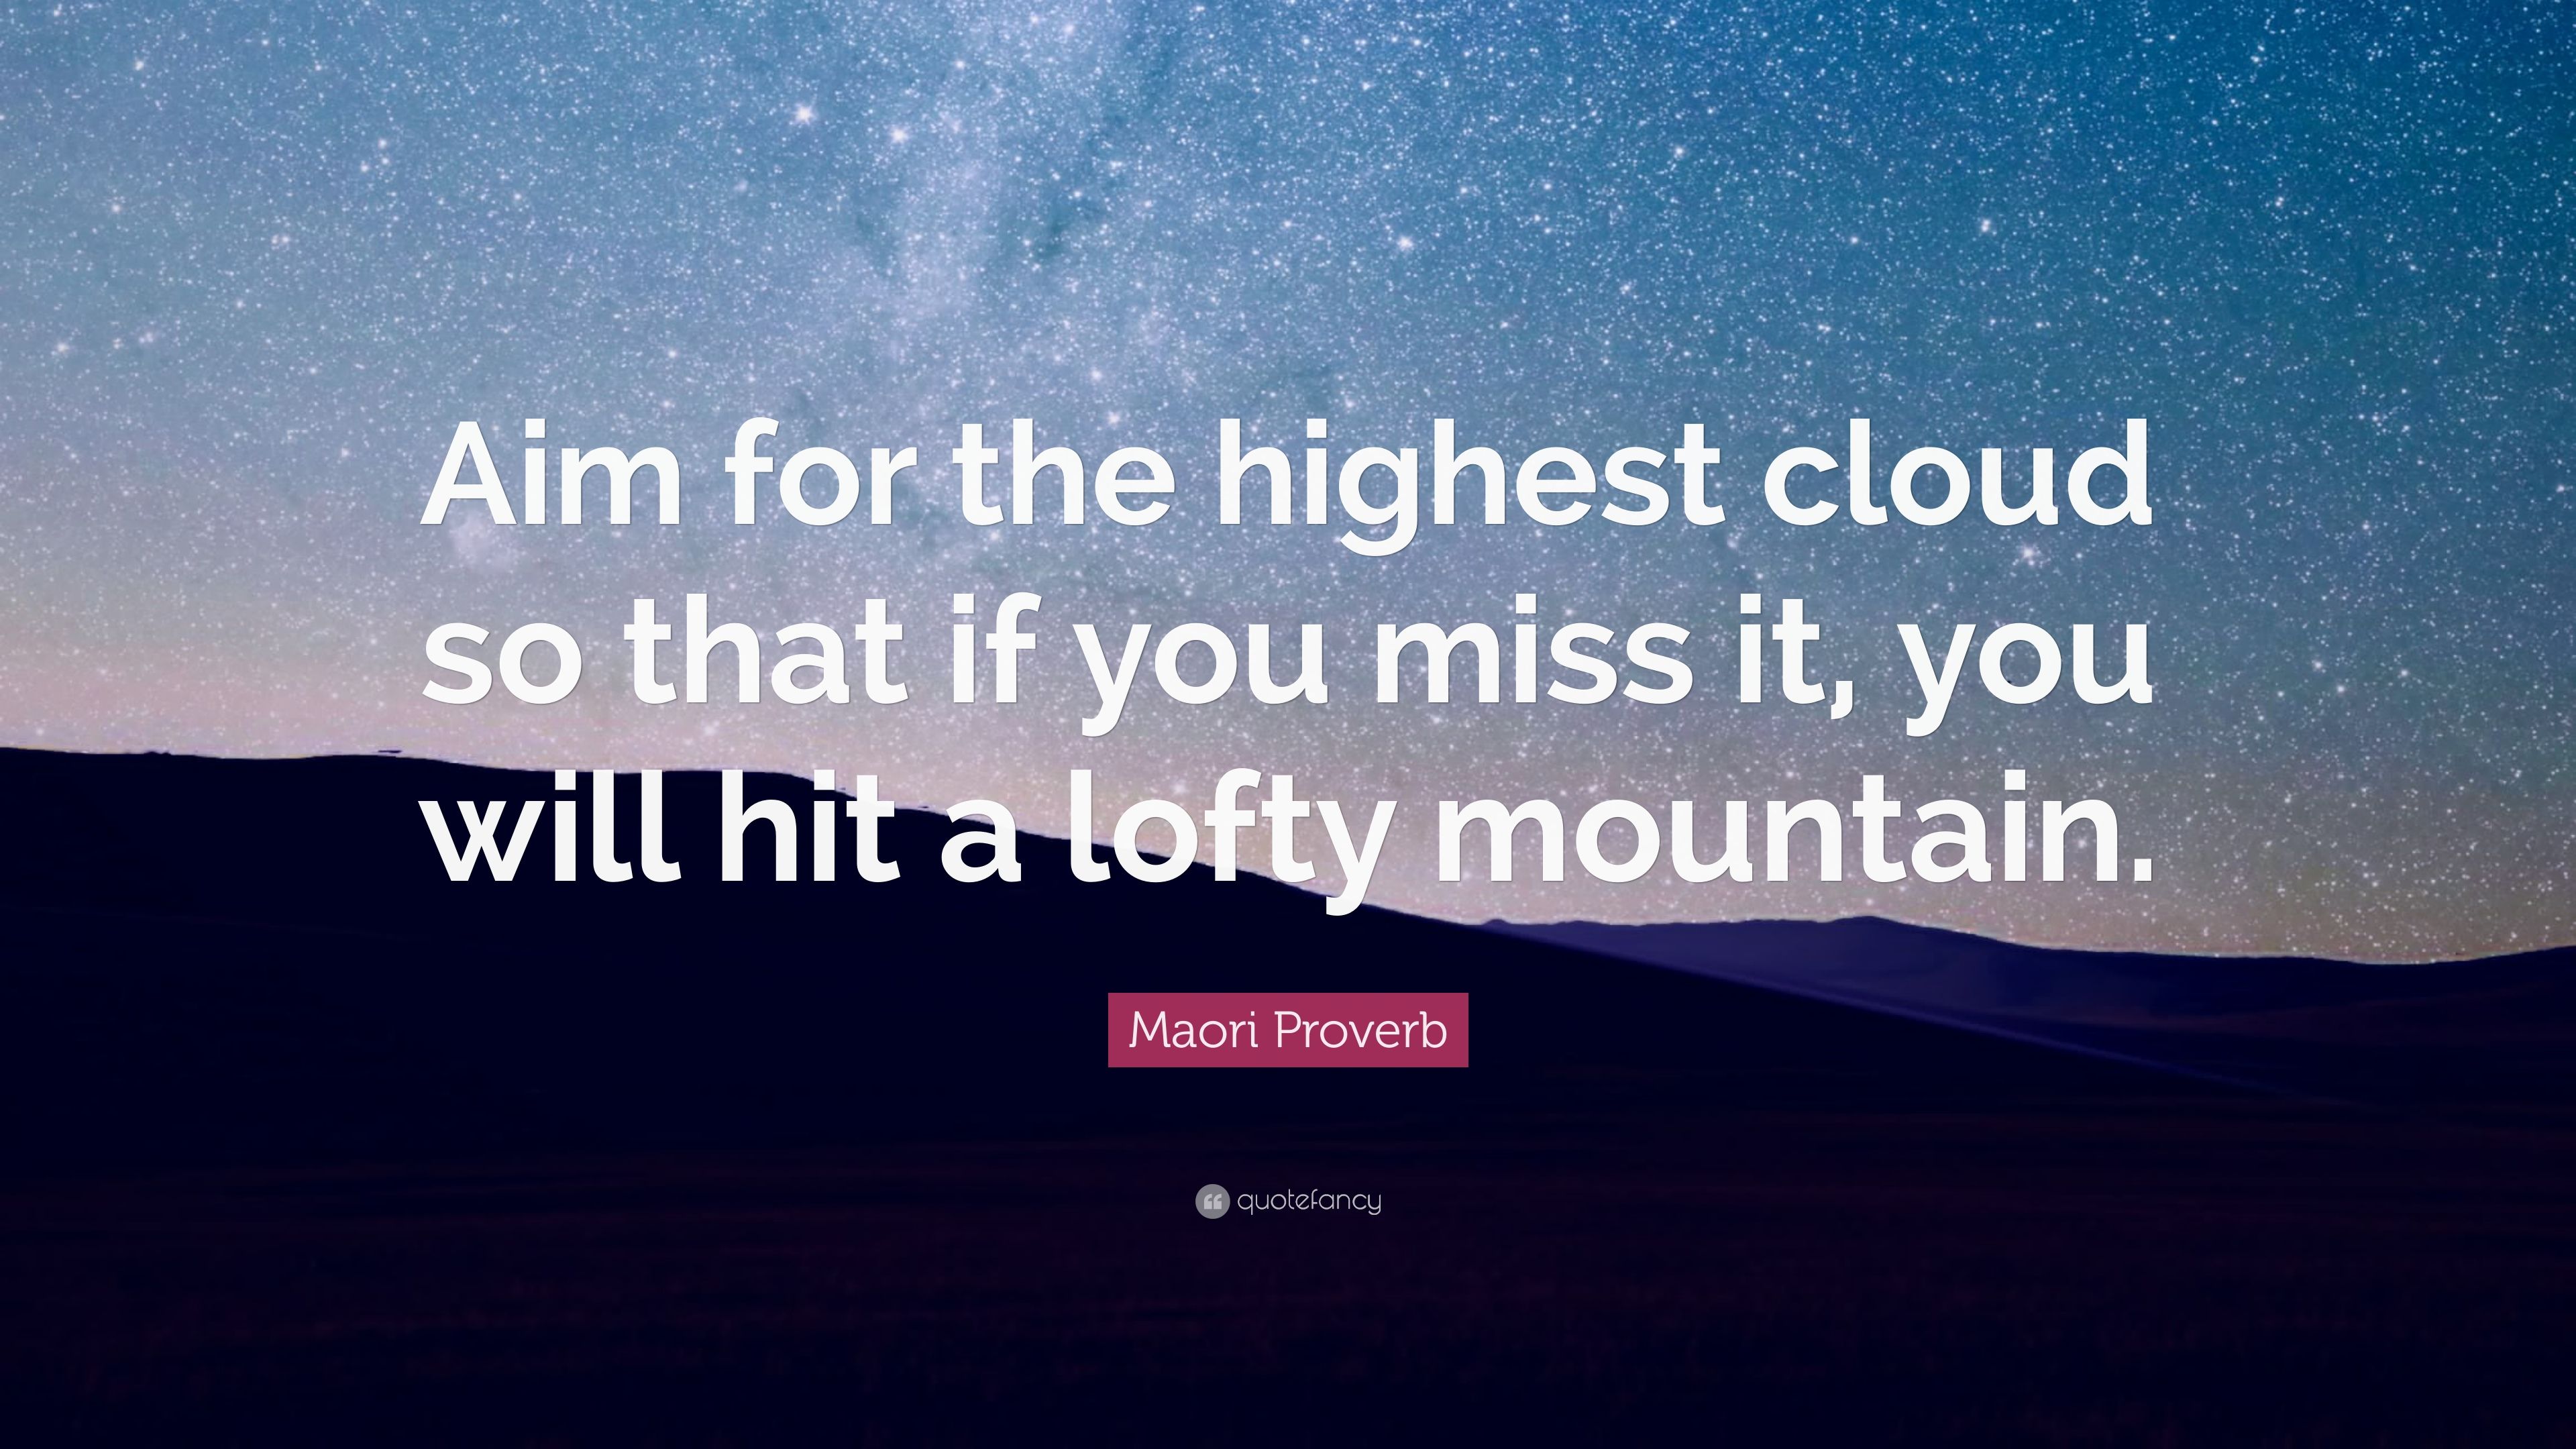 Maori Proverb Quote Aim for the highest cloud so that if you